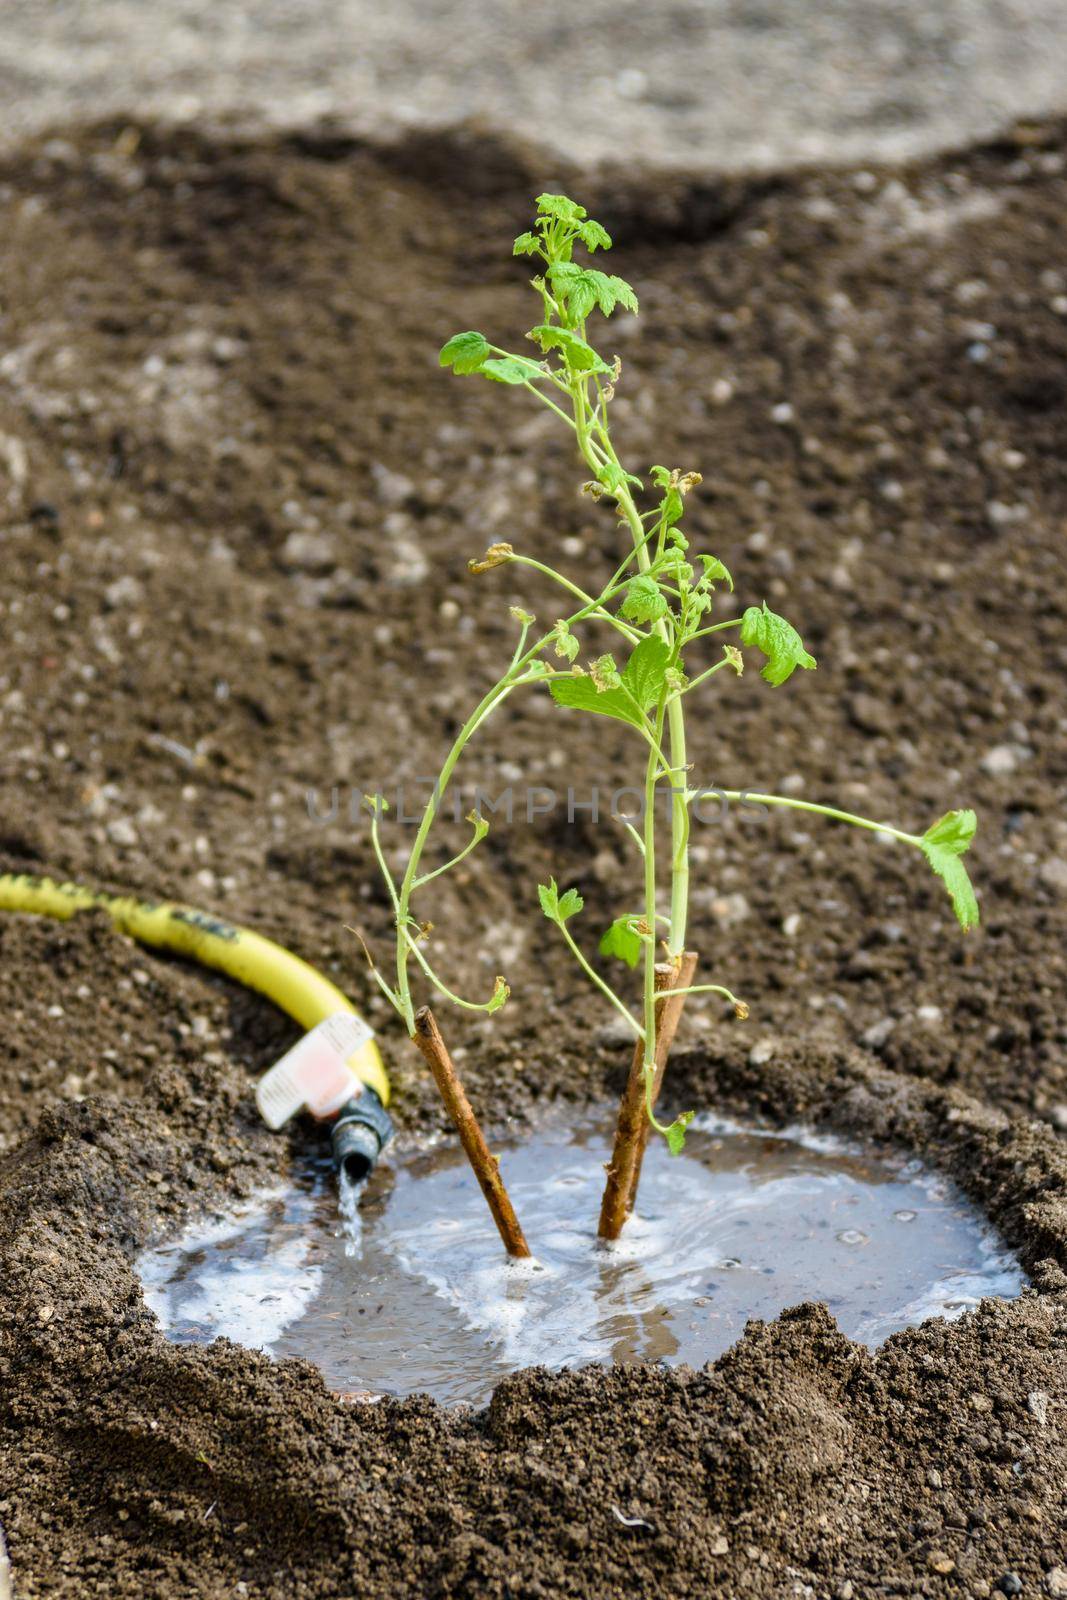 Watering a freshly planted currant seedling on the background of the weeded earth by Madhourse